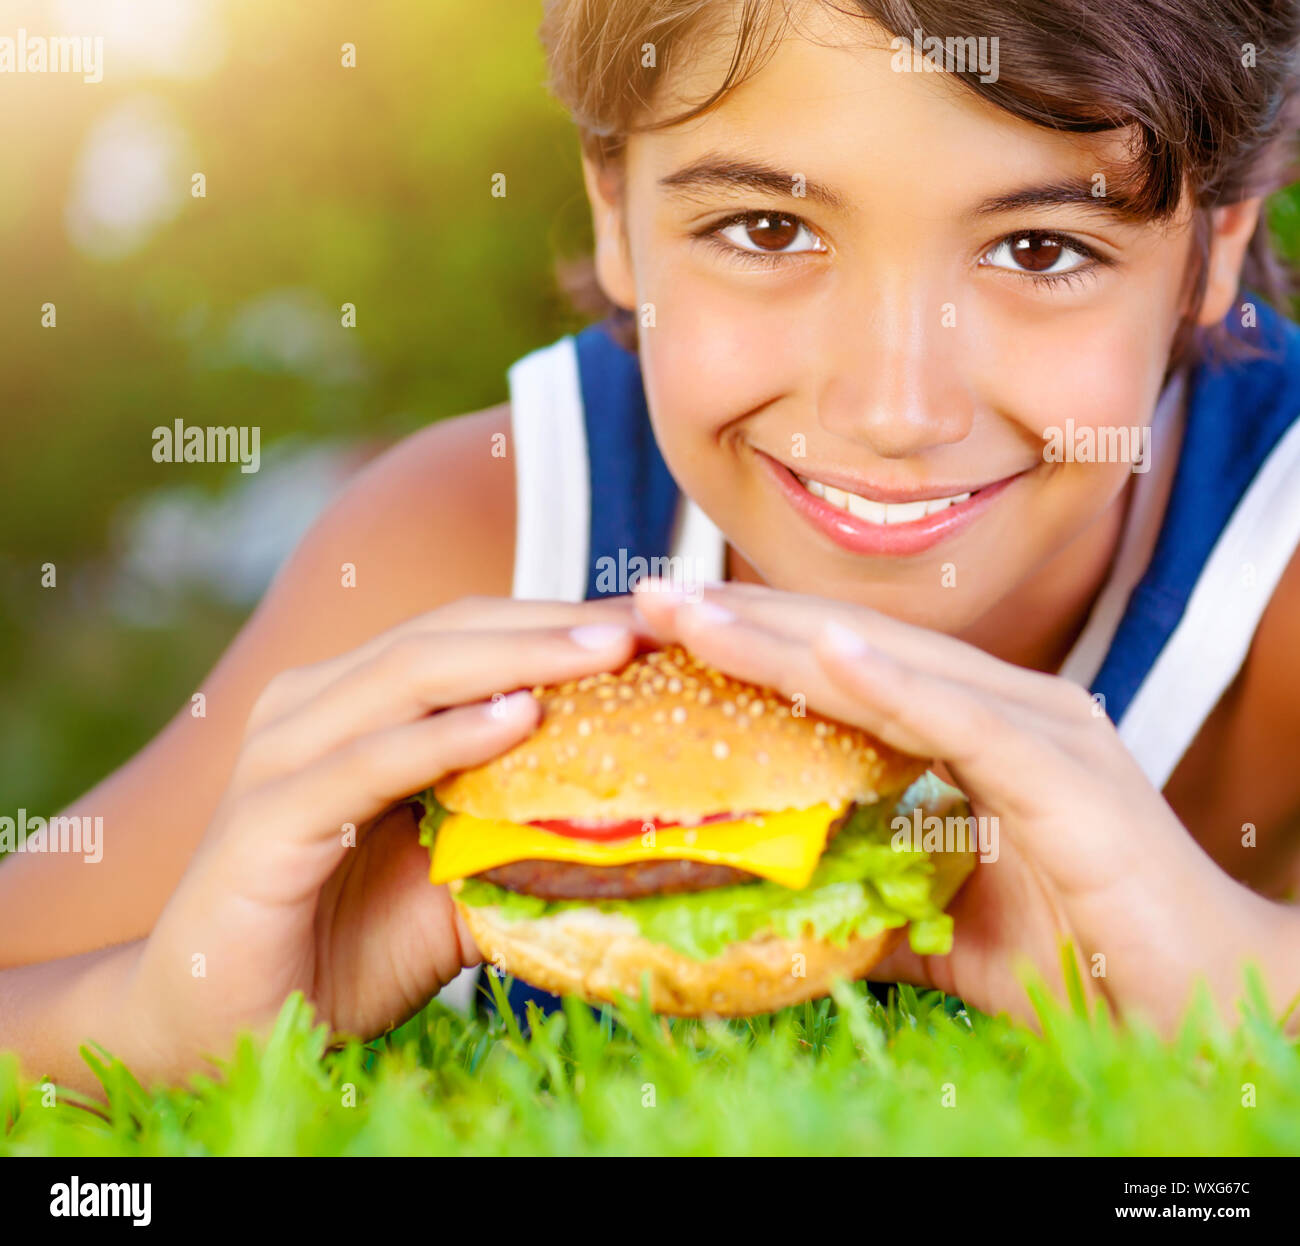 Closeup portrait of cute happy boy eating big tasty fatty burger outdoors, lying down on green field and enjoying sandwich with cheese, meat and veget Stock Photo